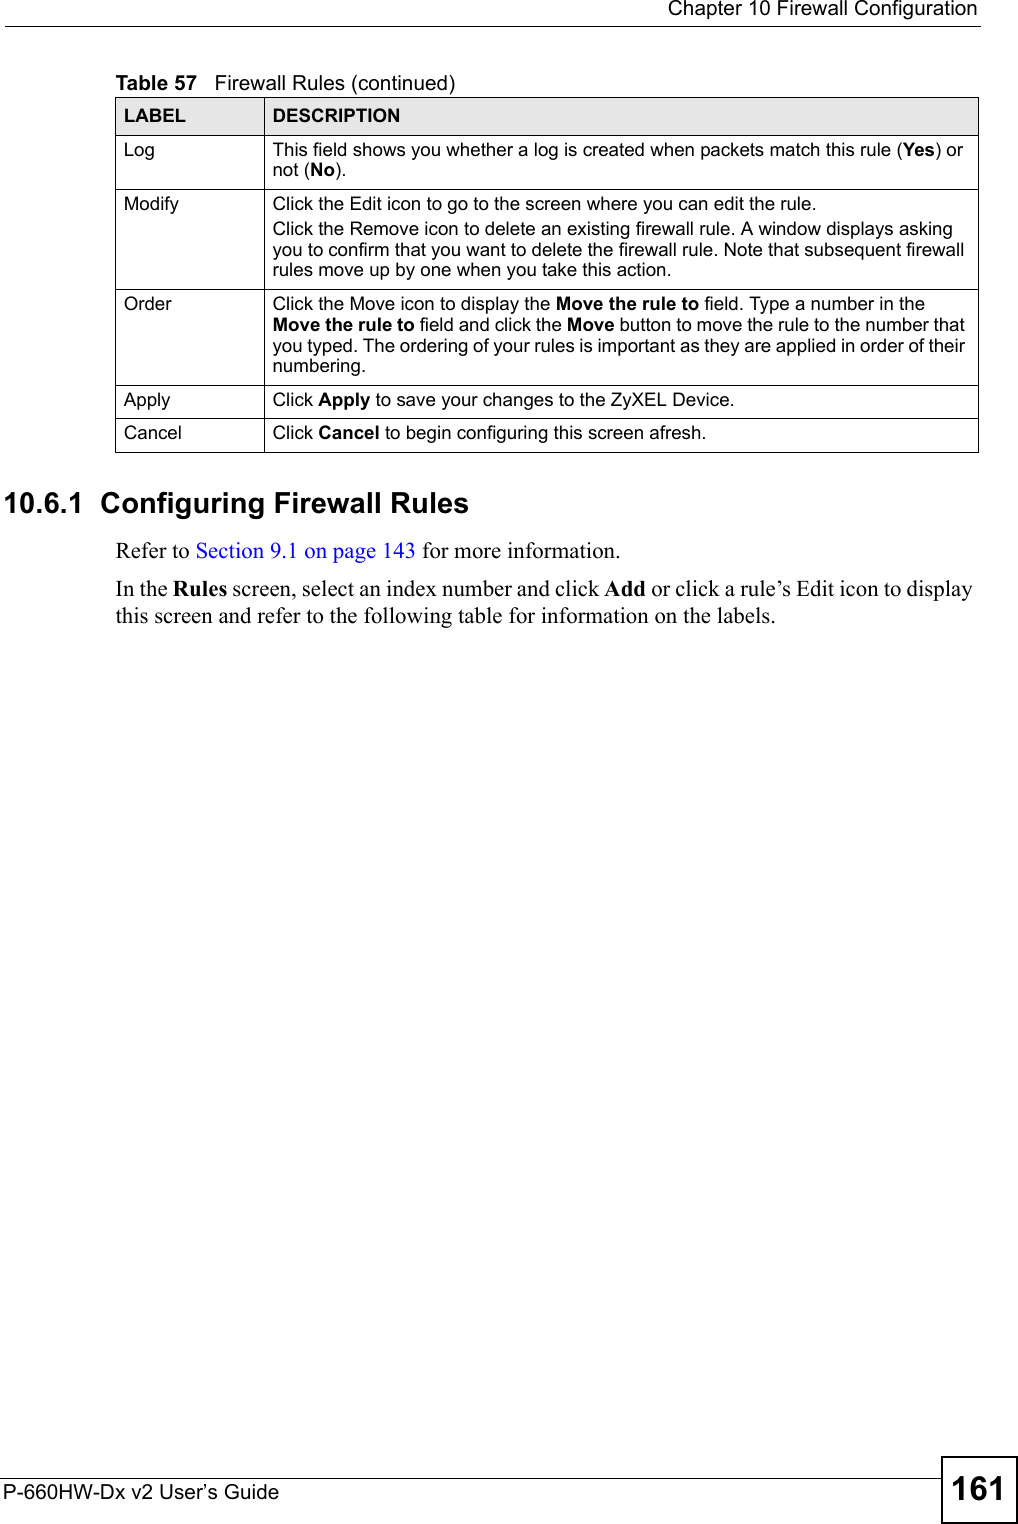  Chapter 10 Firewall ConfigurationP-660HW-Dx v2 User’s Guide 16110.6.1  Configuring Firewall Rules   Refer to Section 9.1 on page 143 for more information. In the Rules screen, select an index number and click Add or click a rule’s Edit icon to display this screen and refer to the following table for information on the labels.Log This field shows you whether a log is created when packets match this rule (Yes) or not (No).Modify Click the Edit icon to go to the screen where you can edit the rule.Click the Remove icon to delete an existing firewall rule. A window displays asking you to confirm that you want to delete the firewall rule. Note that subsequent firewall rules move up by one when you take this action.Order Click the Move icon to display the Move the rule to field. Type a number in the Move the rule to field and click the Move button to move the rule to the number that you typed. The ordering of your rules is important as they are applied in order of their numbering.Apply Click Apply to save your changes to the ZyXEL Device.Cancel Click Cancel to begin configuring this screen afresh.Table 57   Firewall Rules (continued)LABEL DESCRIPTION